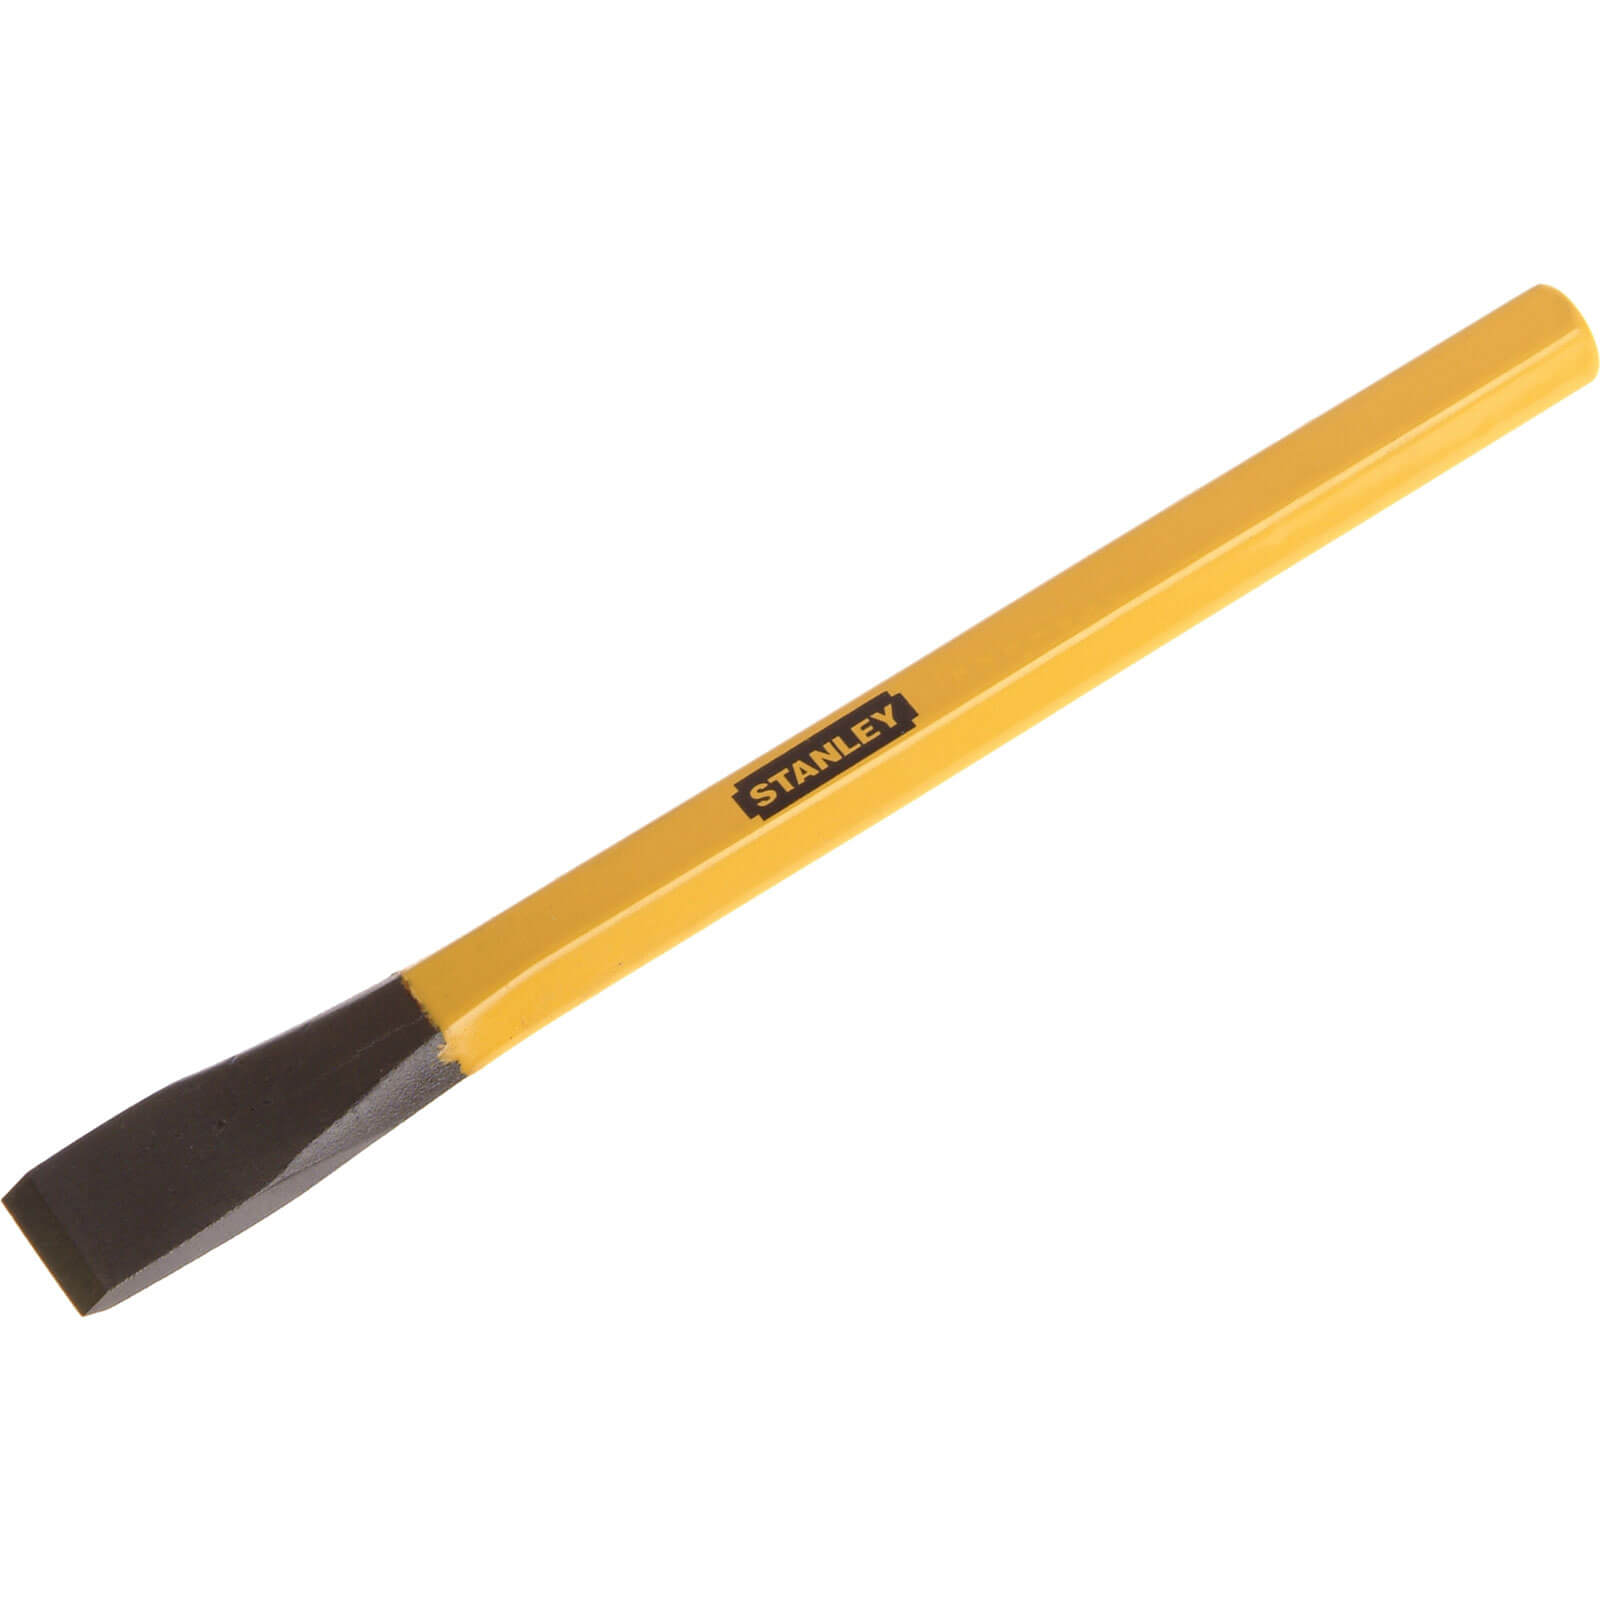 Stanley Cold Chisel 1/2" x 6" 4 18 287